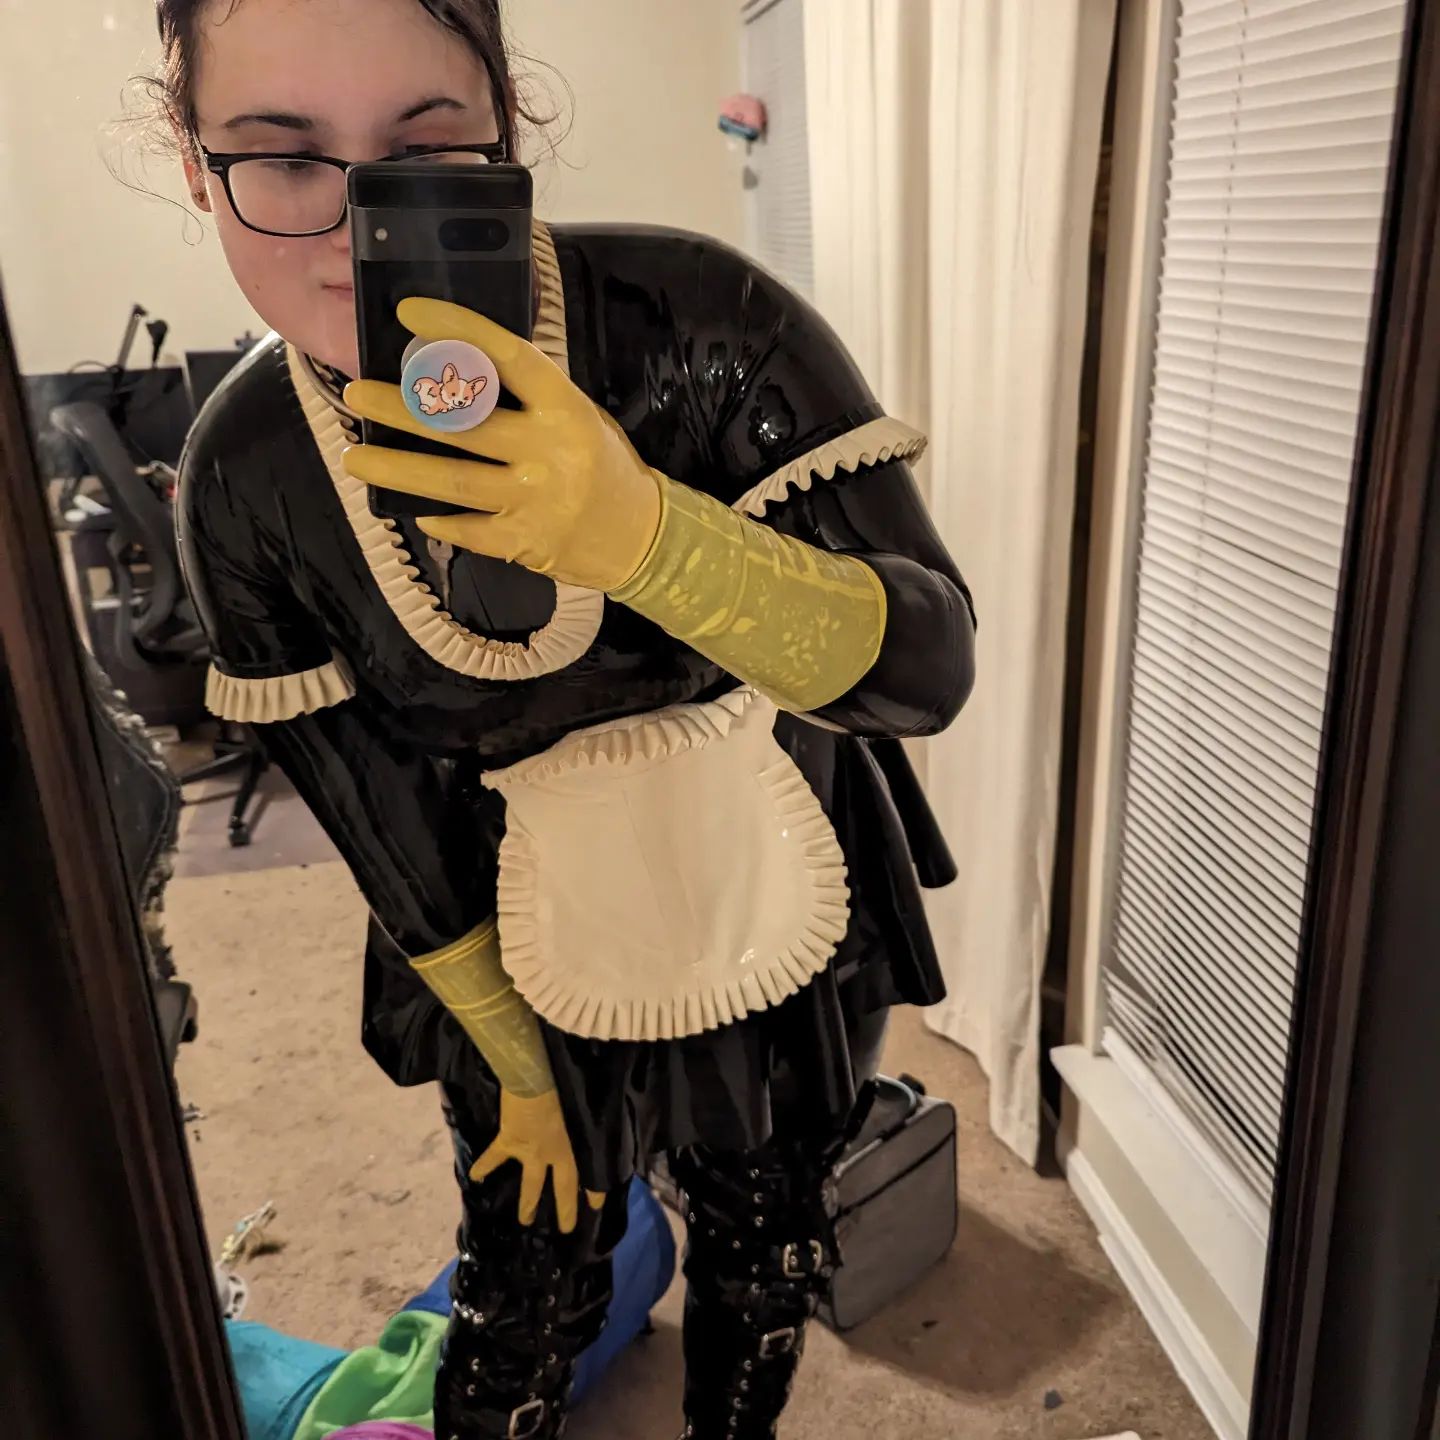 Just put my Latex Maid Outfit over My latex Catsuit. I have some beautiful Yellow Latex Gloves and some 8inch pvc pleasers 💕☺️💕💕💕💕

Its going to be a fun night